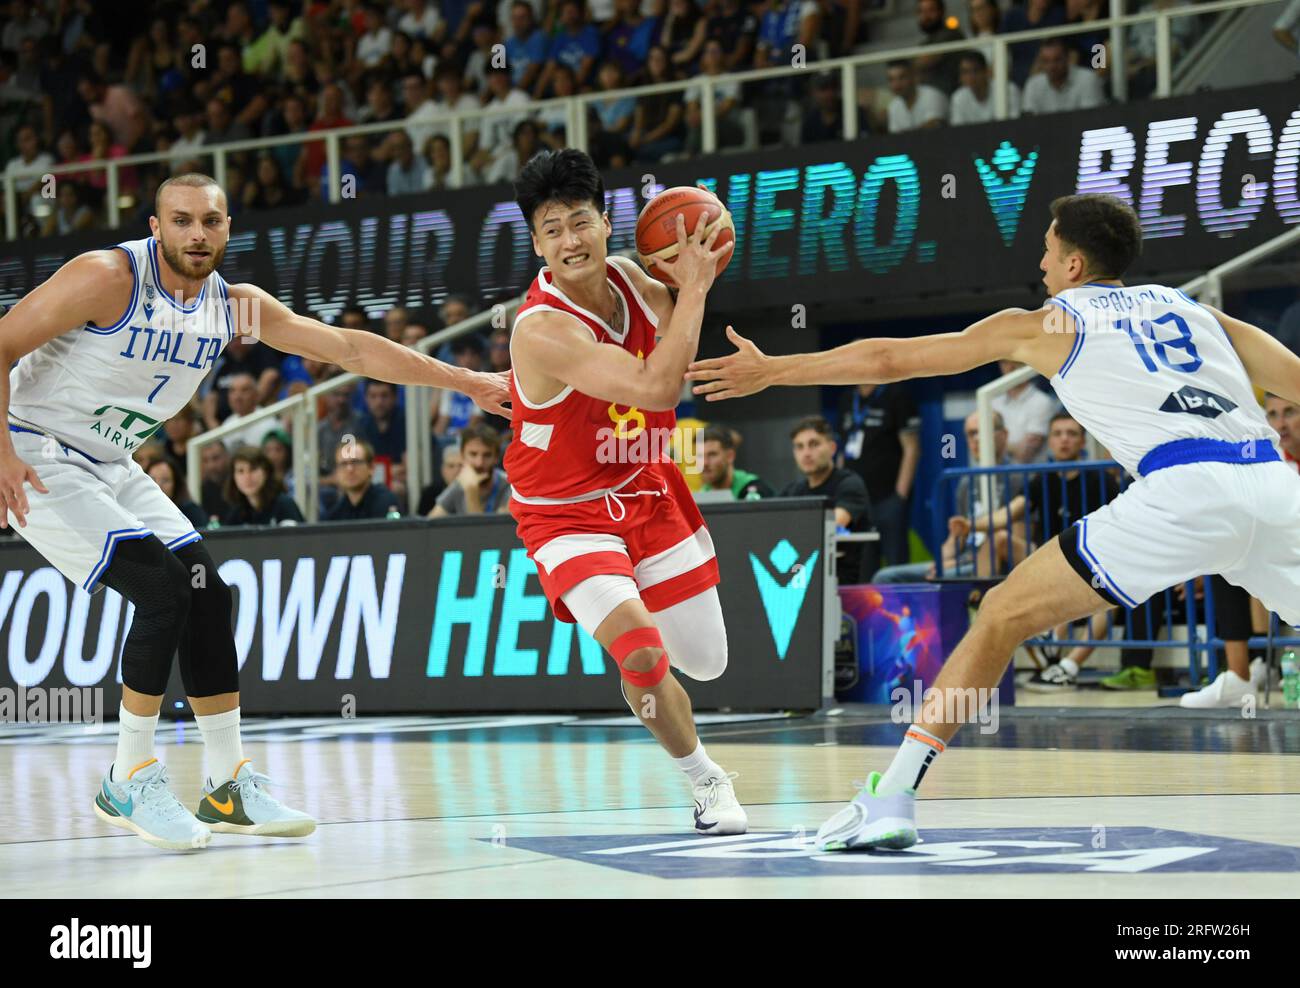 Trento, Italy. 5th Aug, 2023. Zhao Rui (C) of China competes during the Trentino Cup basketball match between Italy and China, in Trento, Italy, Aug